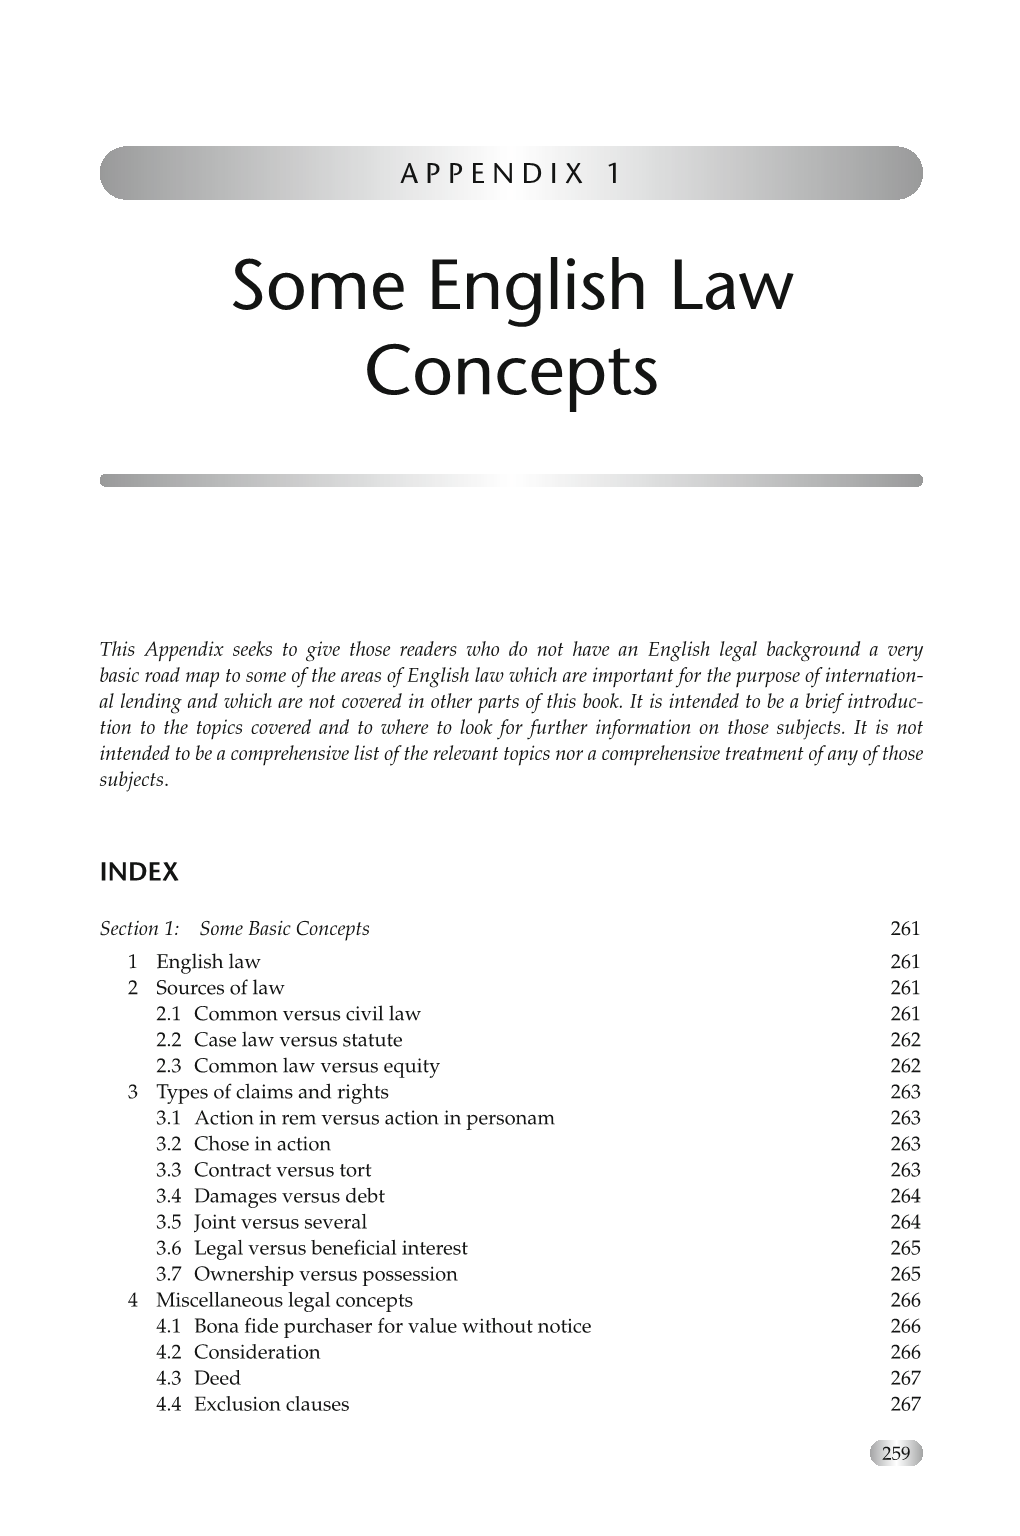 Some English Law Concepts